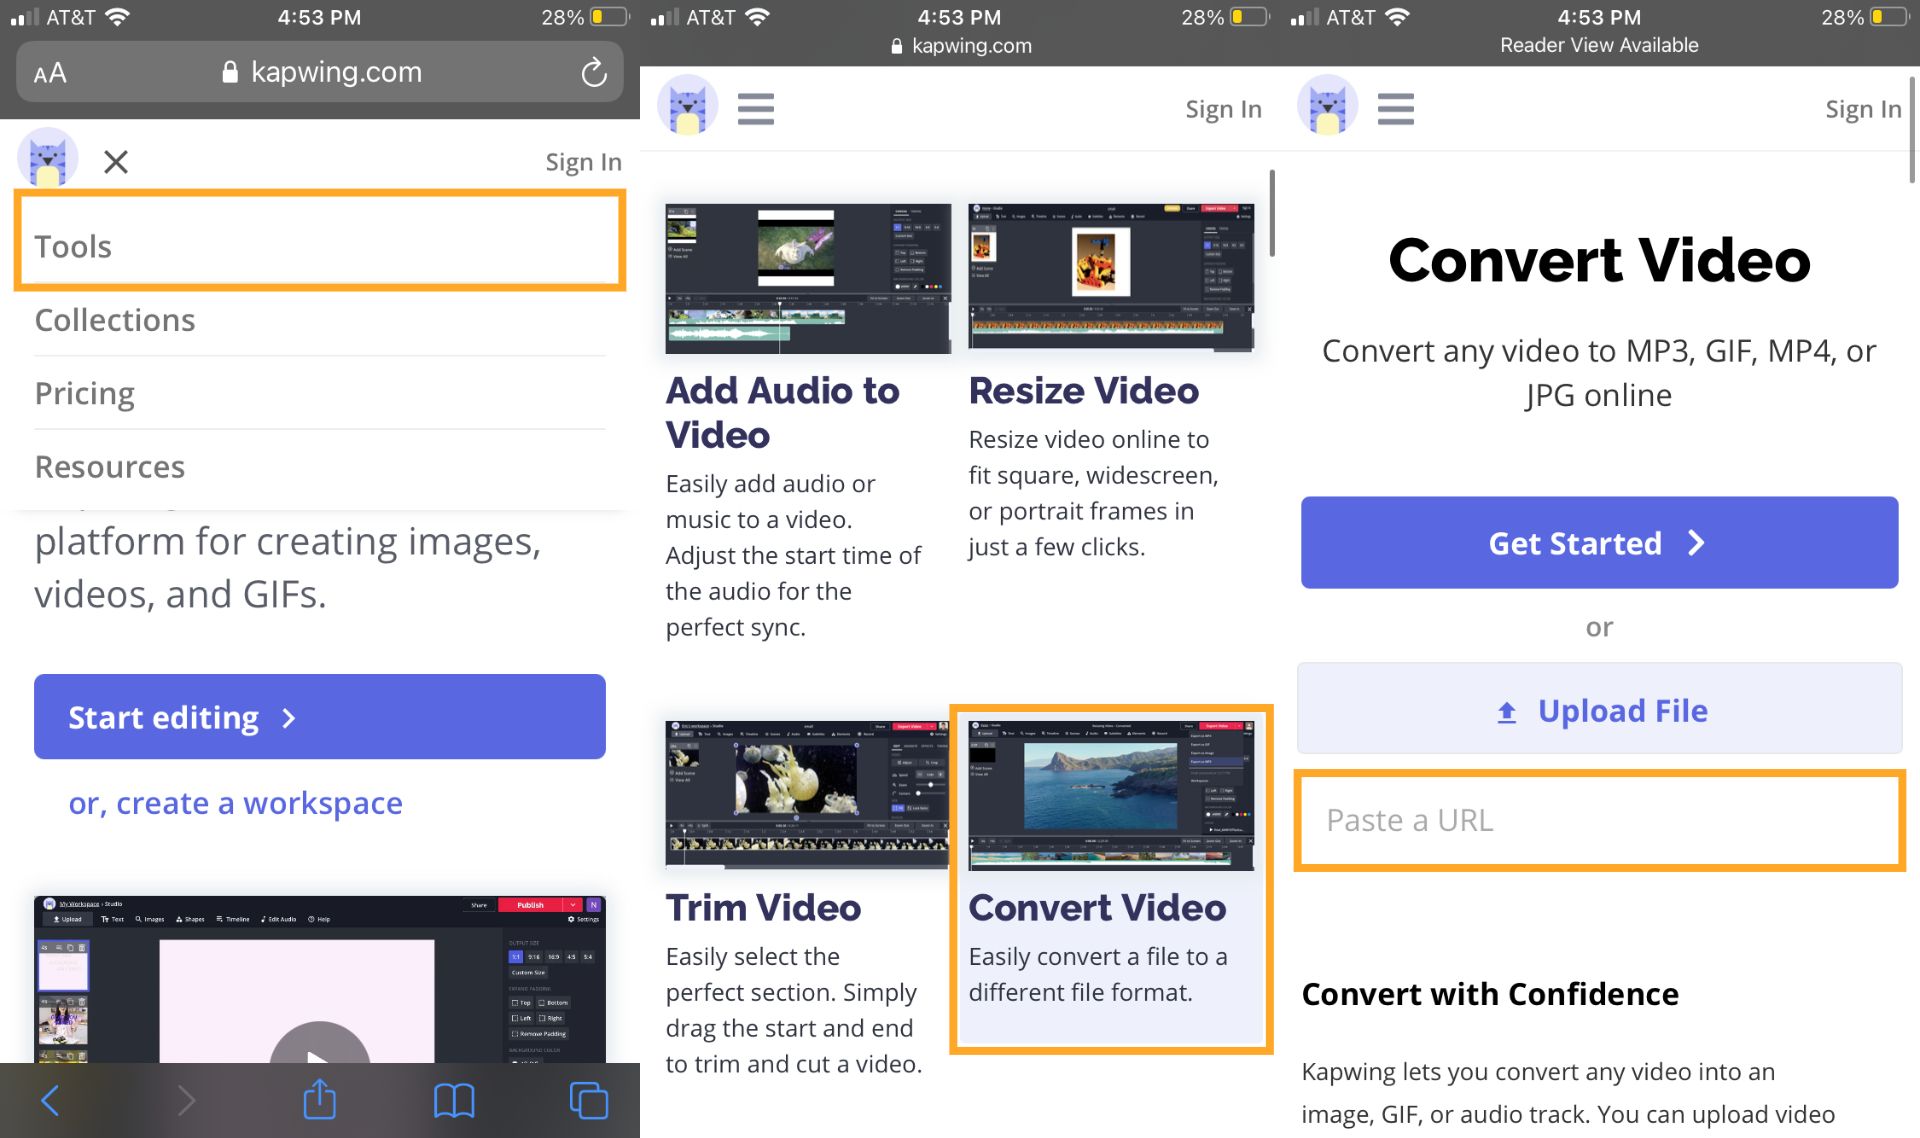 user interface of the convert video tool by Kapwing on an iPhone.